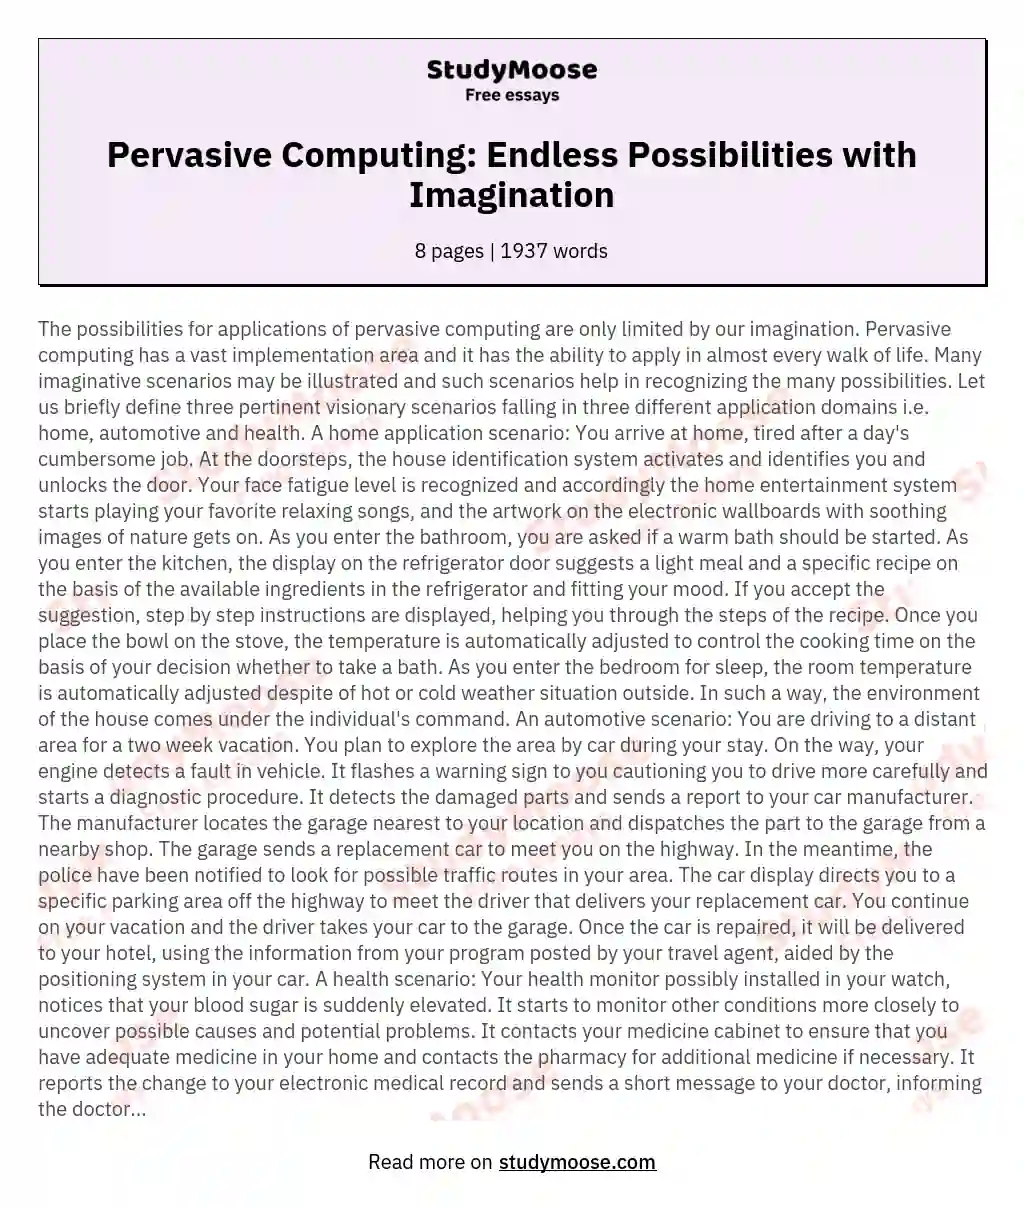 The Possibilities for Applications of Pervasive Computing are Only Limited by Our Imagination.